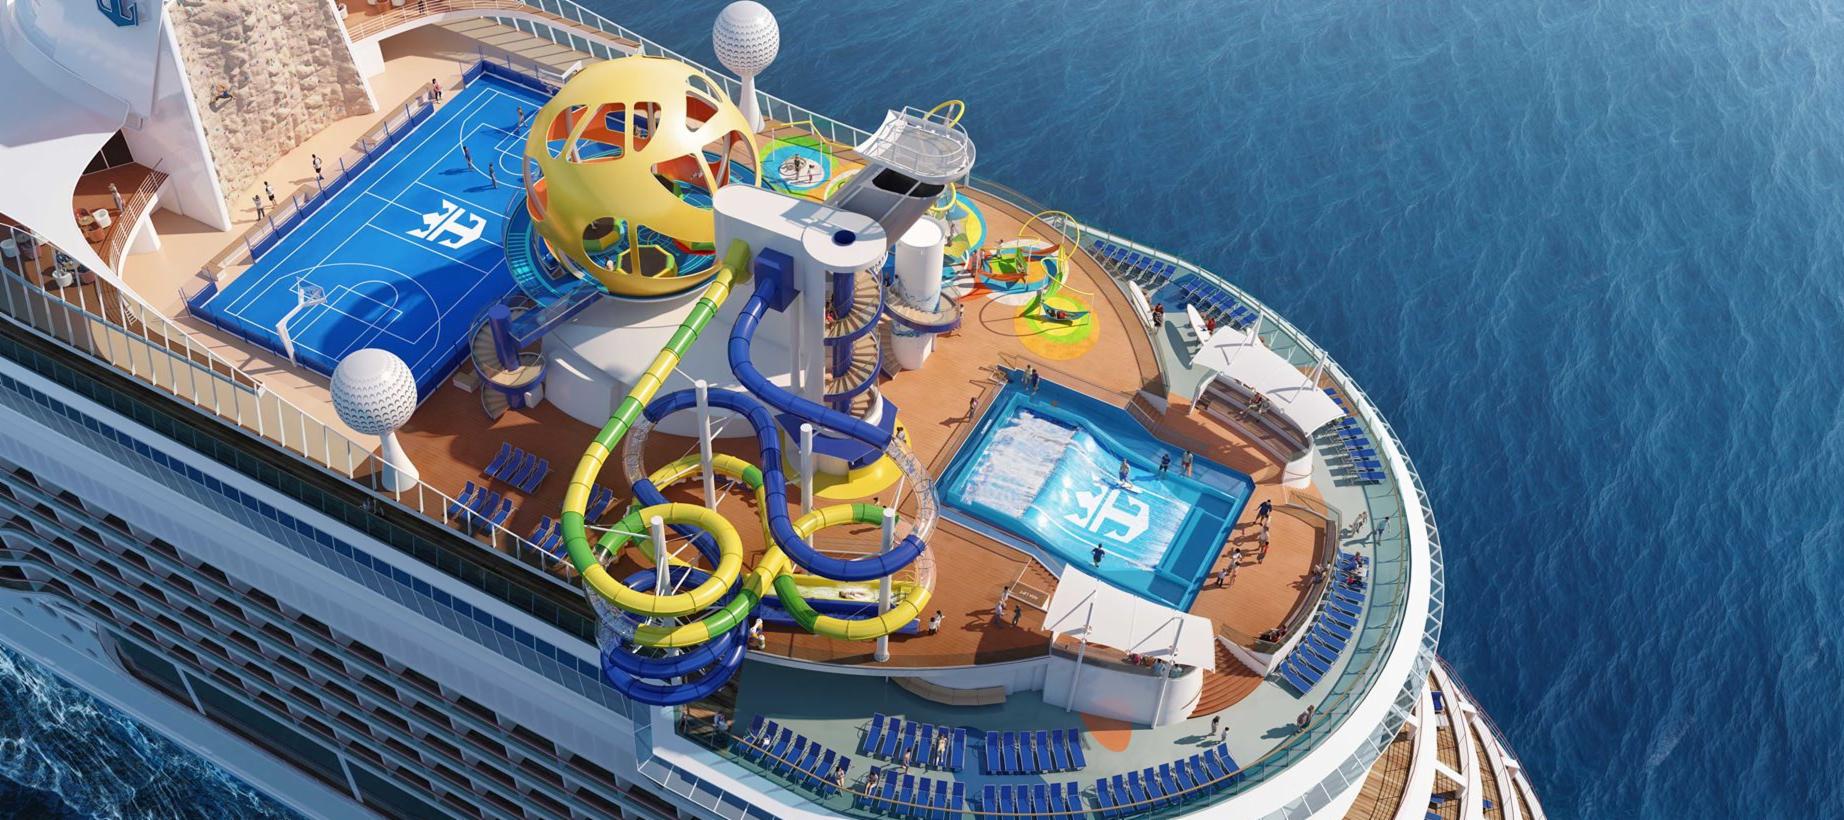 Royal Caribbean's Independence of the Seas